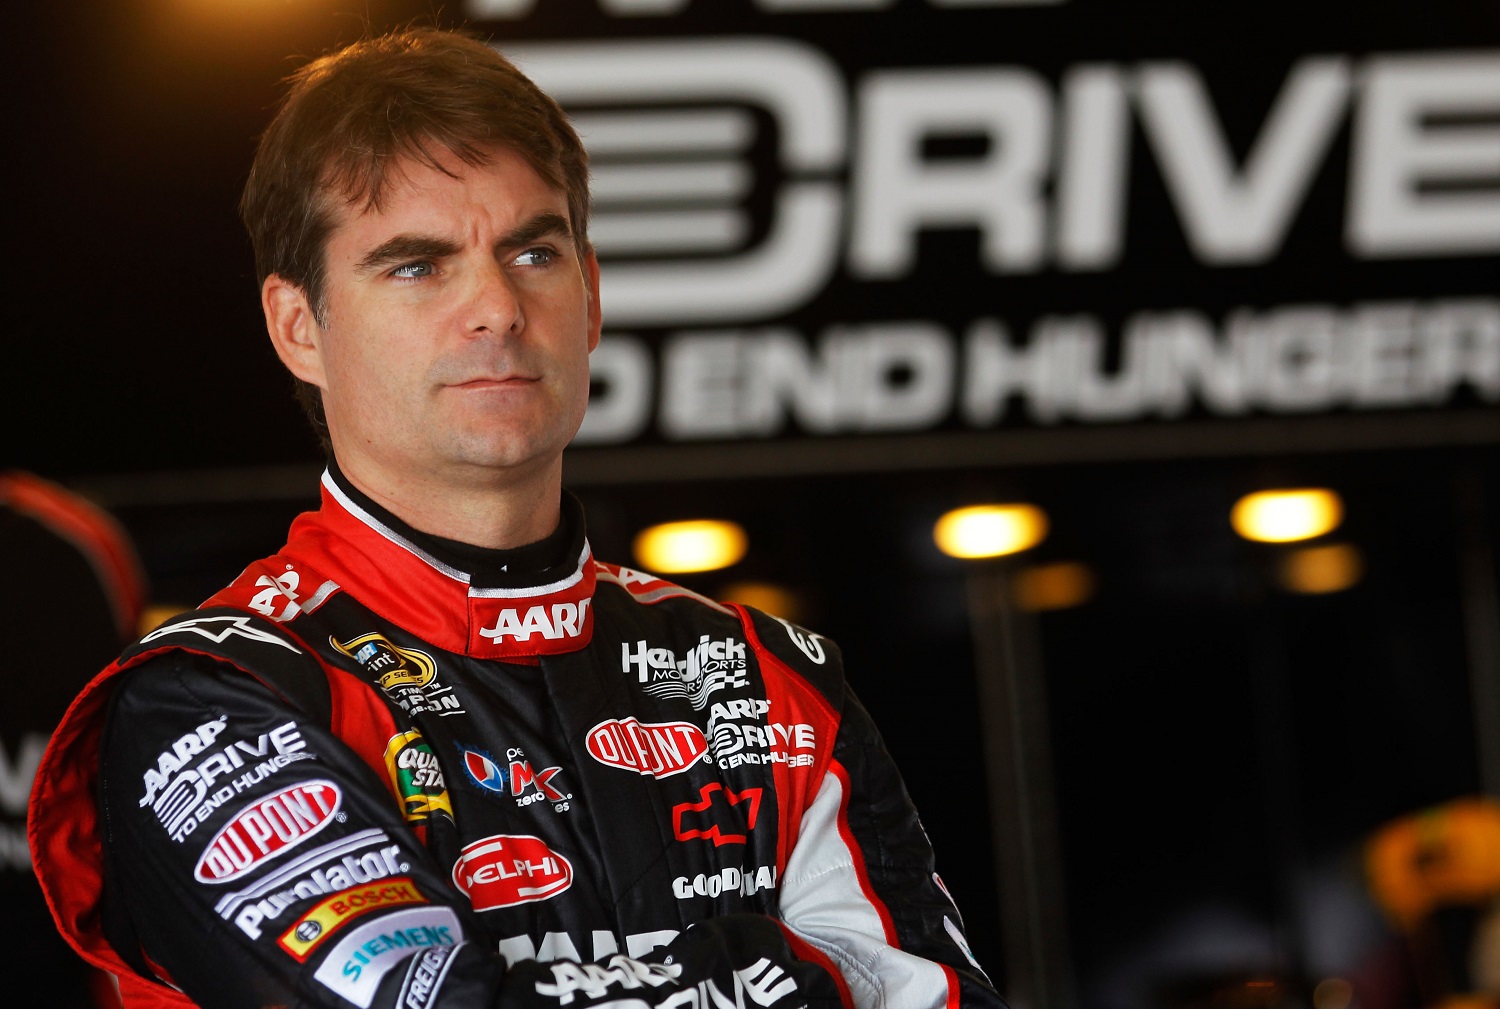 Jeff Gordon looks on in the garage during practice for the Daytona 500 at Daytona International Speedway on Feb. 22, 2012. | Todd Warshaw/Getty Images for NASCAR